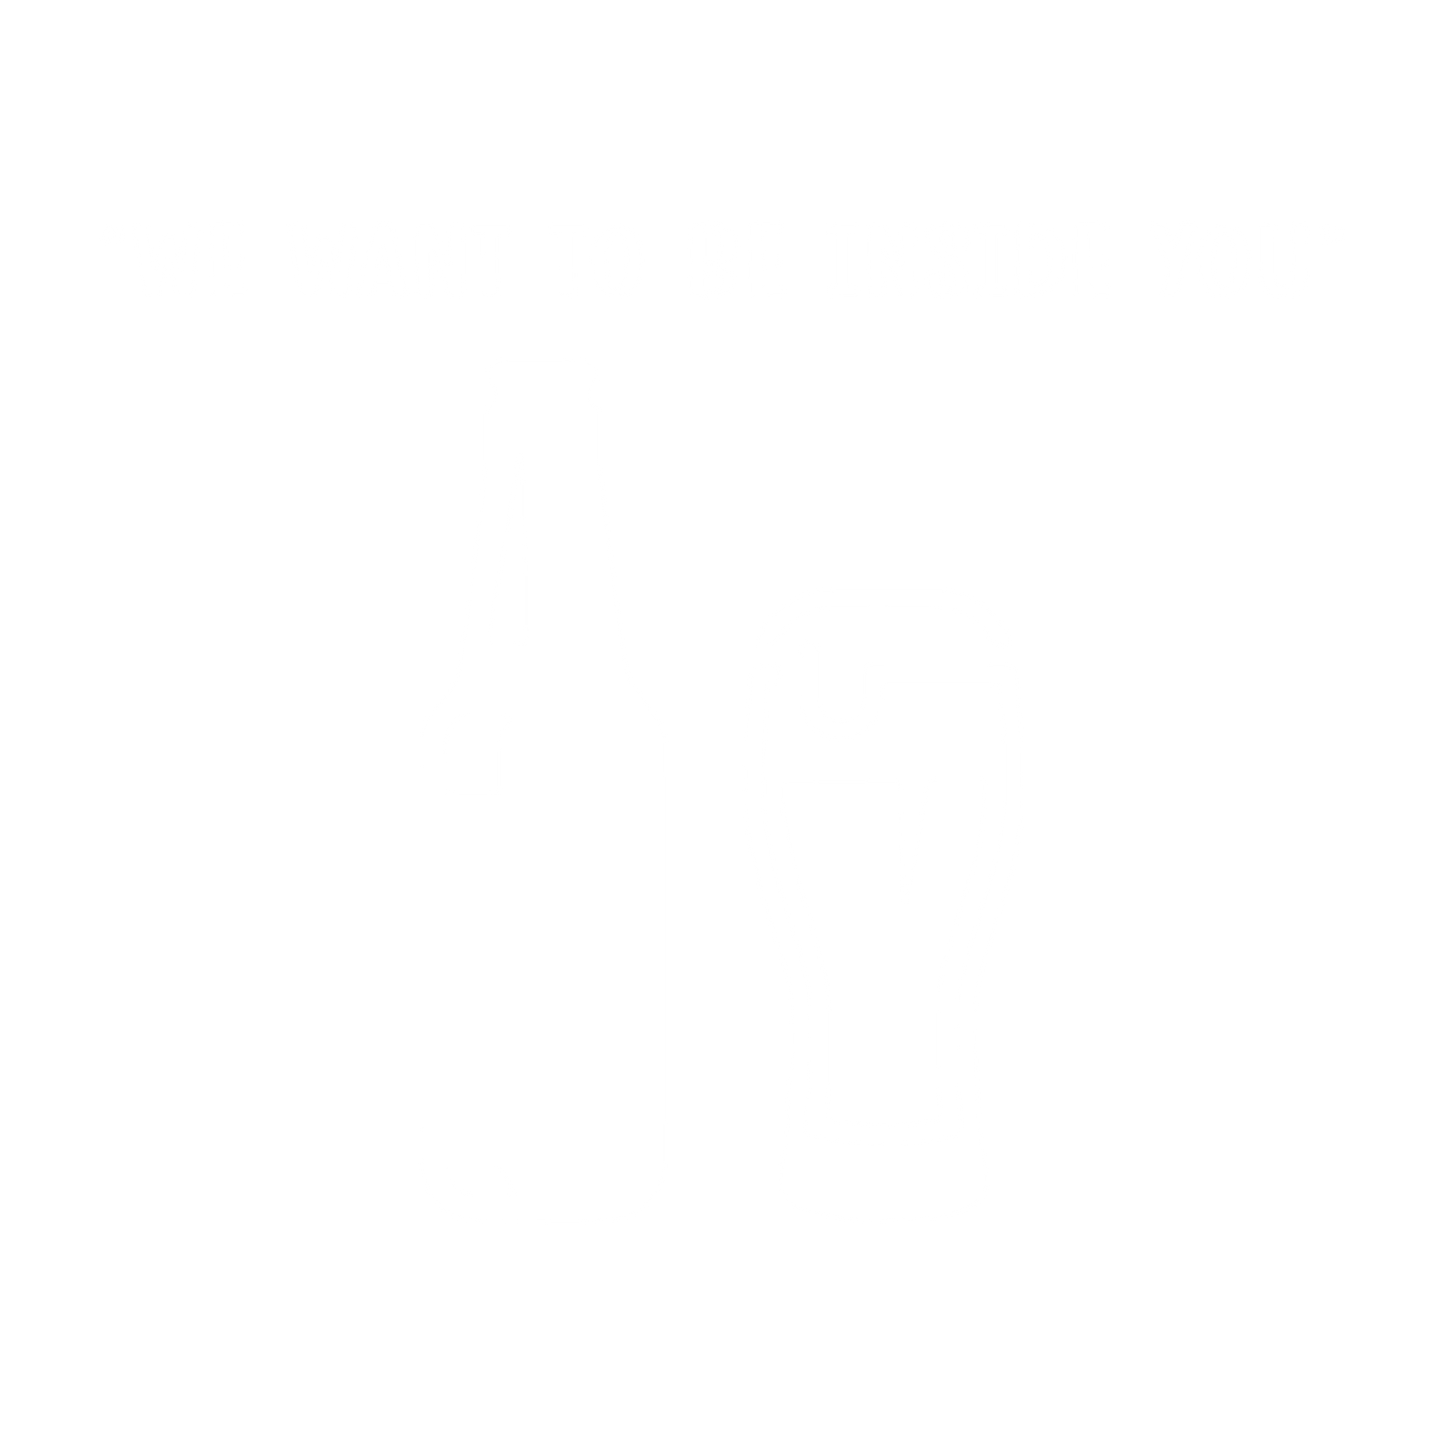 We want to be inside you